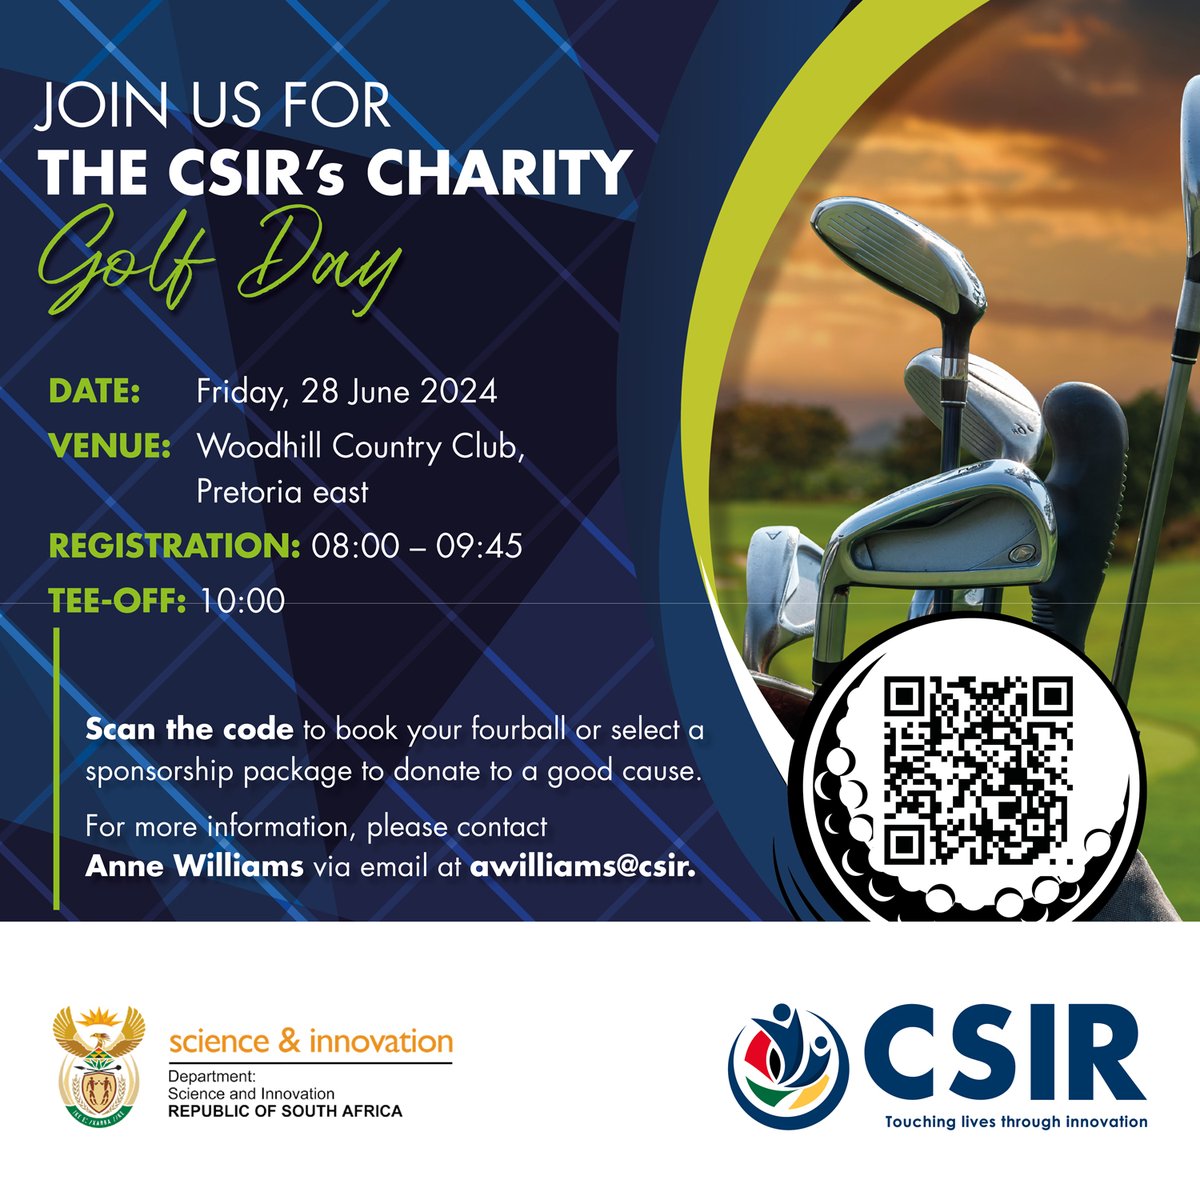 1/2 We are excited to announce that the #TeamCSIR Inaugural Charity Golf Day will be held on 28 June at Woodhill Country Club. Our aim is to enhance & reinforce the learning experience of maths & science in rural communities, by donating learning materials, ensuring a brighter..